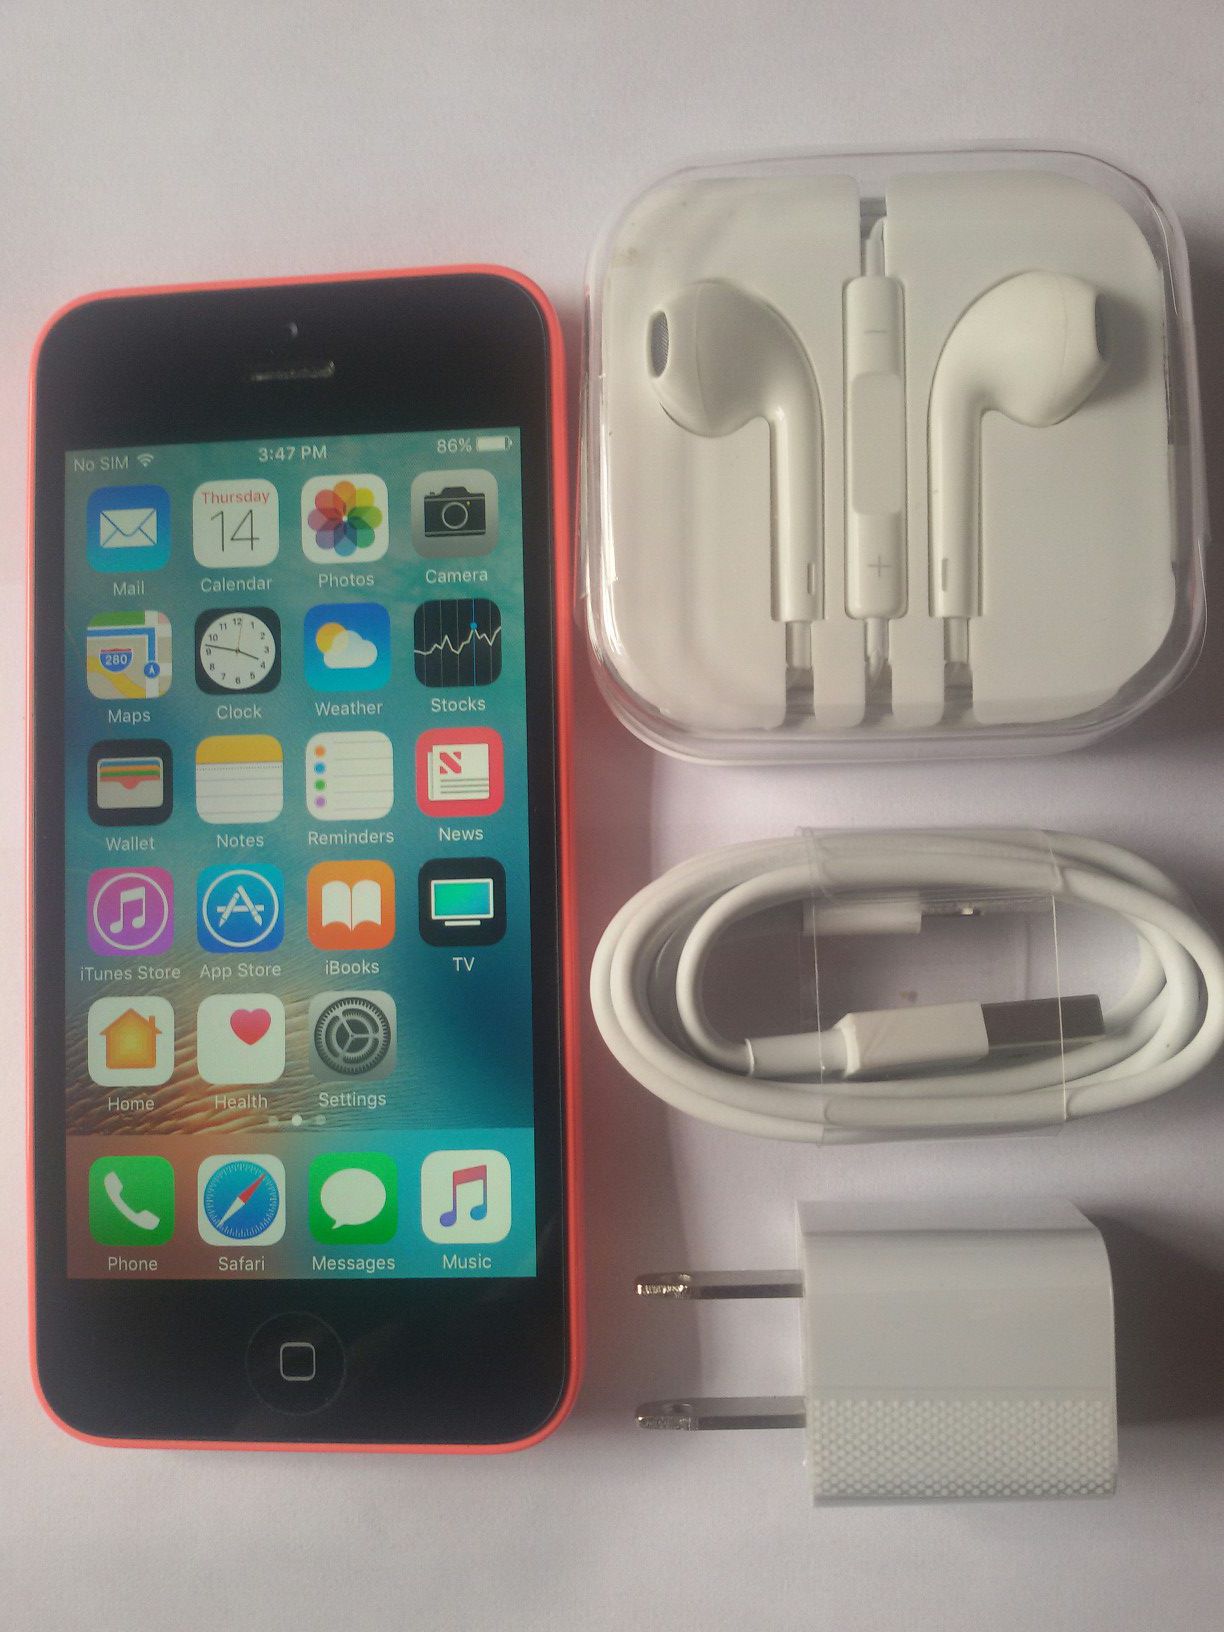 Factory unlocked, iPhone 5c, Great Condition